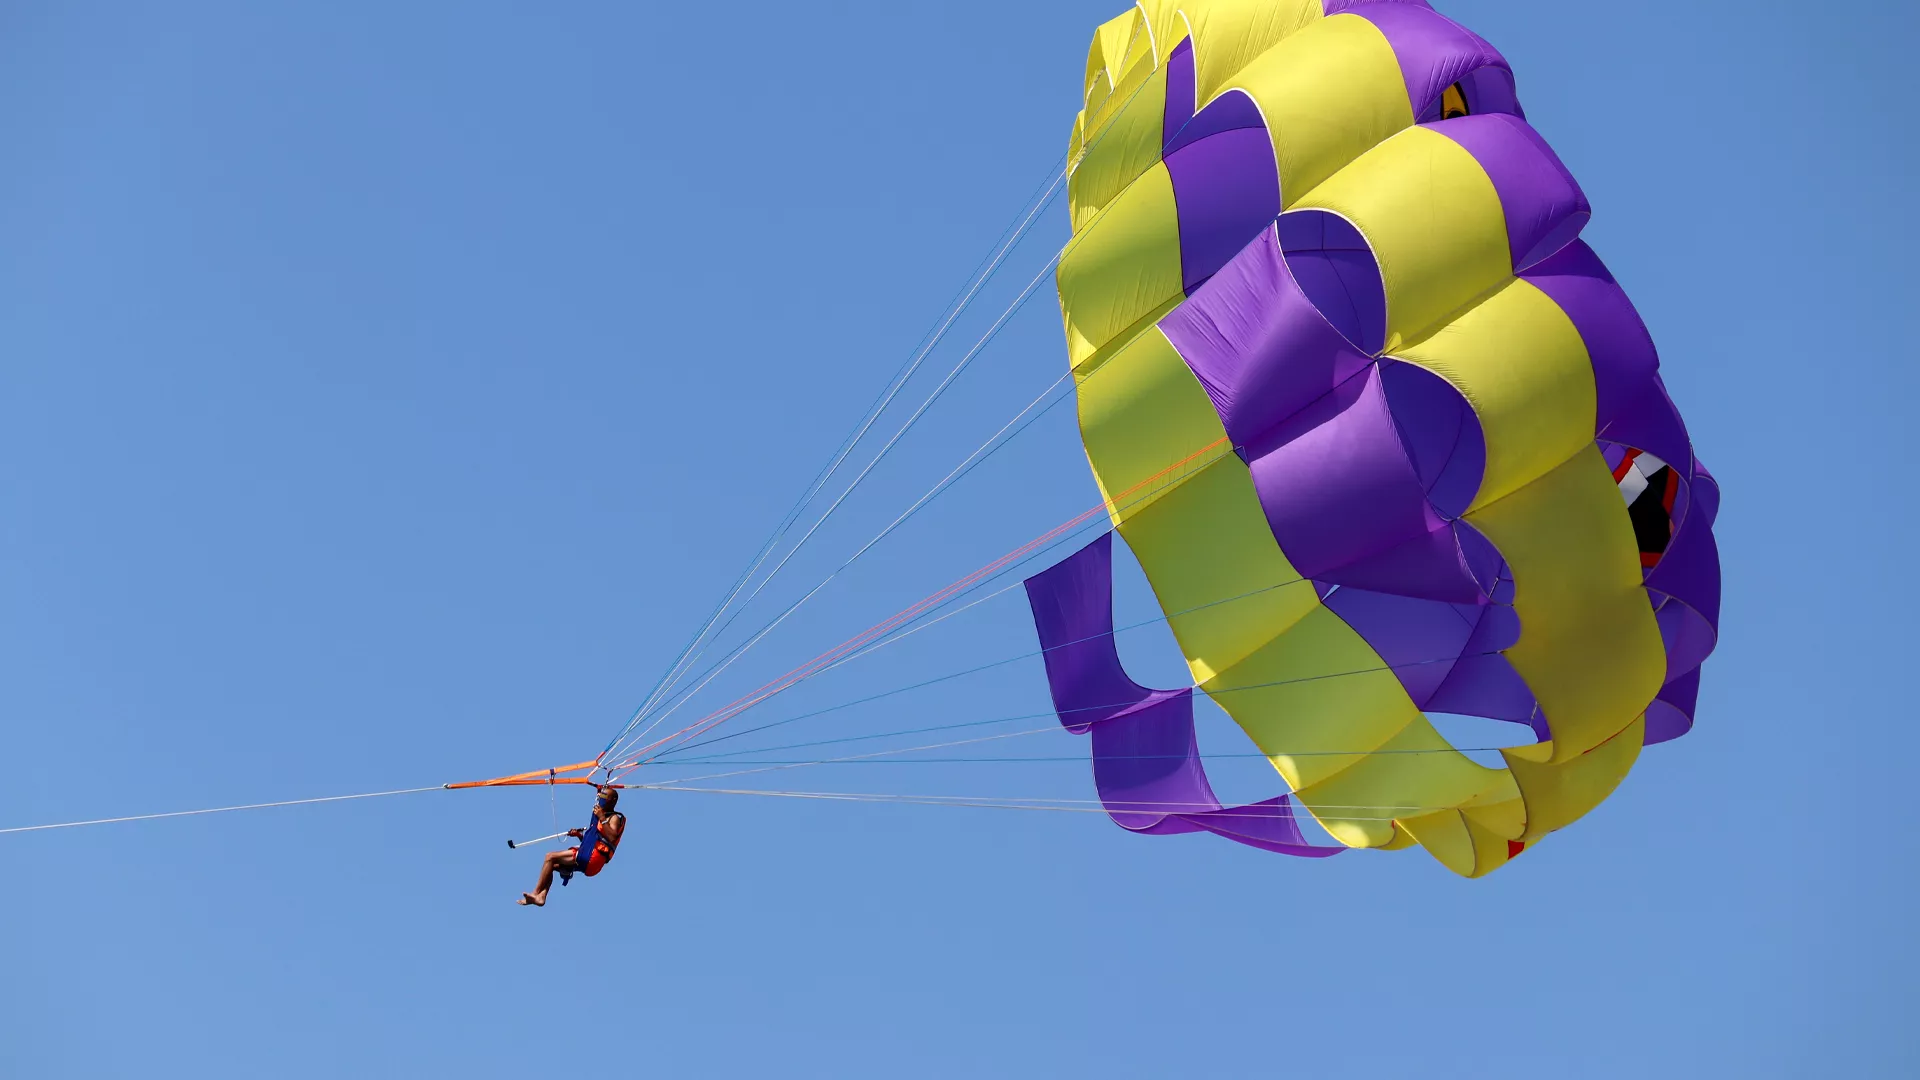 Parasailing 66 in France, Europe | Parasailing - Rated 0.9